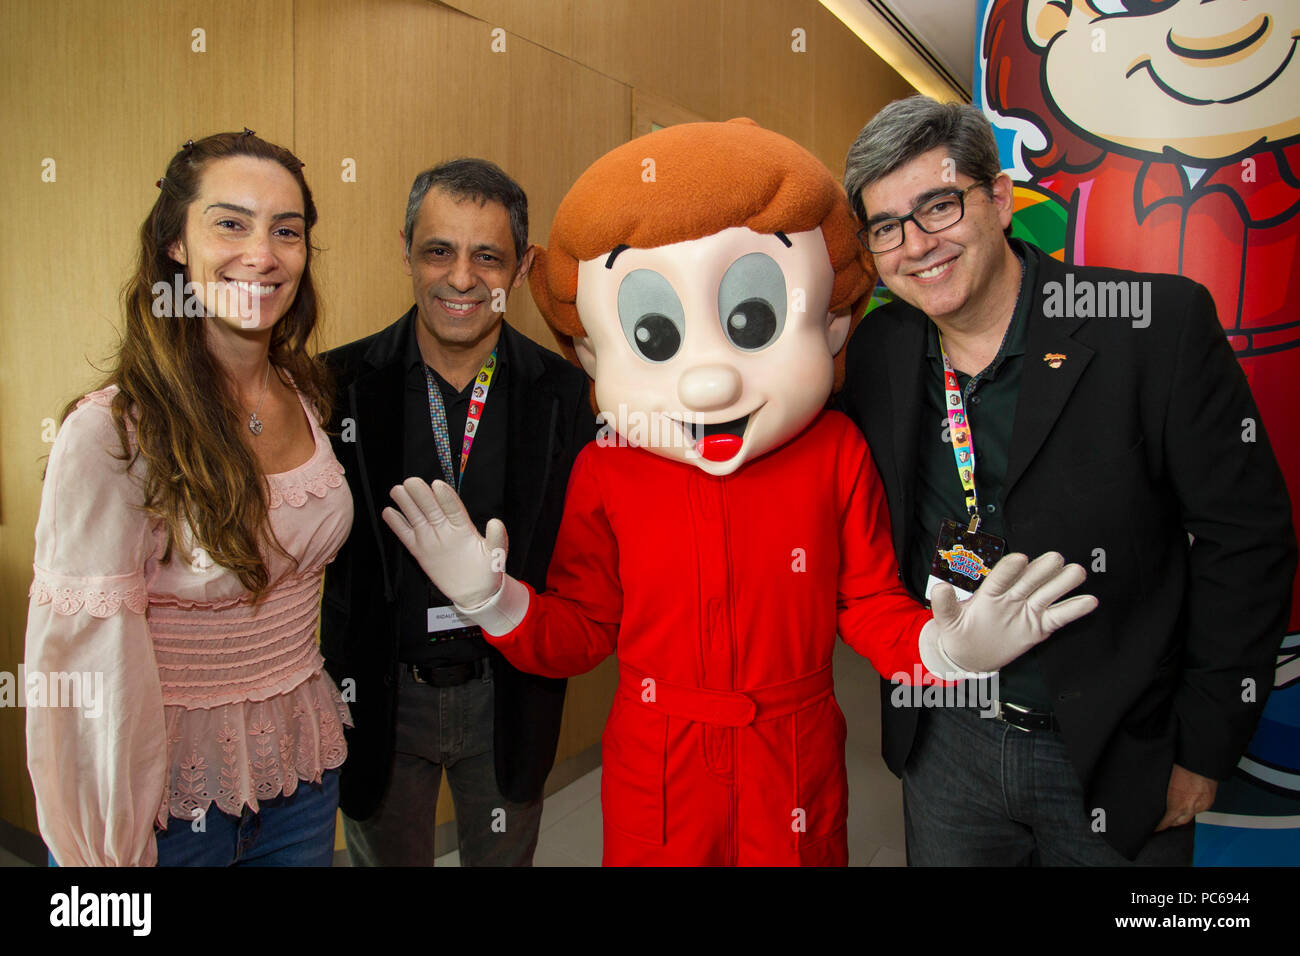 SÃO PAULO, SP - 31.07.2018: ANIMAÇÃO DO SENNINHA É LANÇADA EM SP - This event was held on Tuesday (31) the launch event of the new animated series of the character Senninha that will premiere on 08/08 on Gloobat&#39;s Glat cat channel. The animation that is inspired by three-time Formula 1 champion Ayrton Senna is ed &quotquot;Senninha na Pista Maluca&quot; (&amotquot;Senninha na Pista Maluca&quot;), which has 26 episodes, each with 11 tes, which will be shown dai daily at various times. In the stand ouanca Senna, na, Ridaut Dias Jr and Rogério Maryins. (Photo: Emerson Santos/Fotoarena) Stock Photo